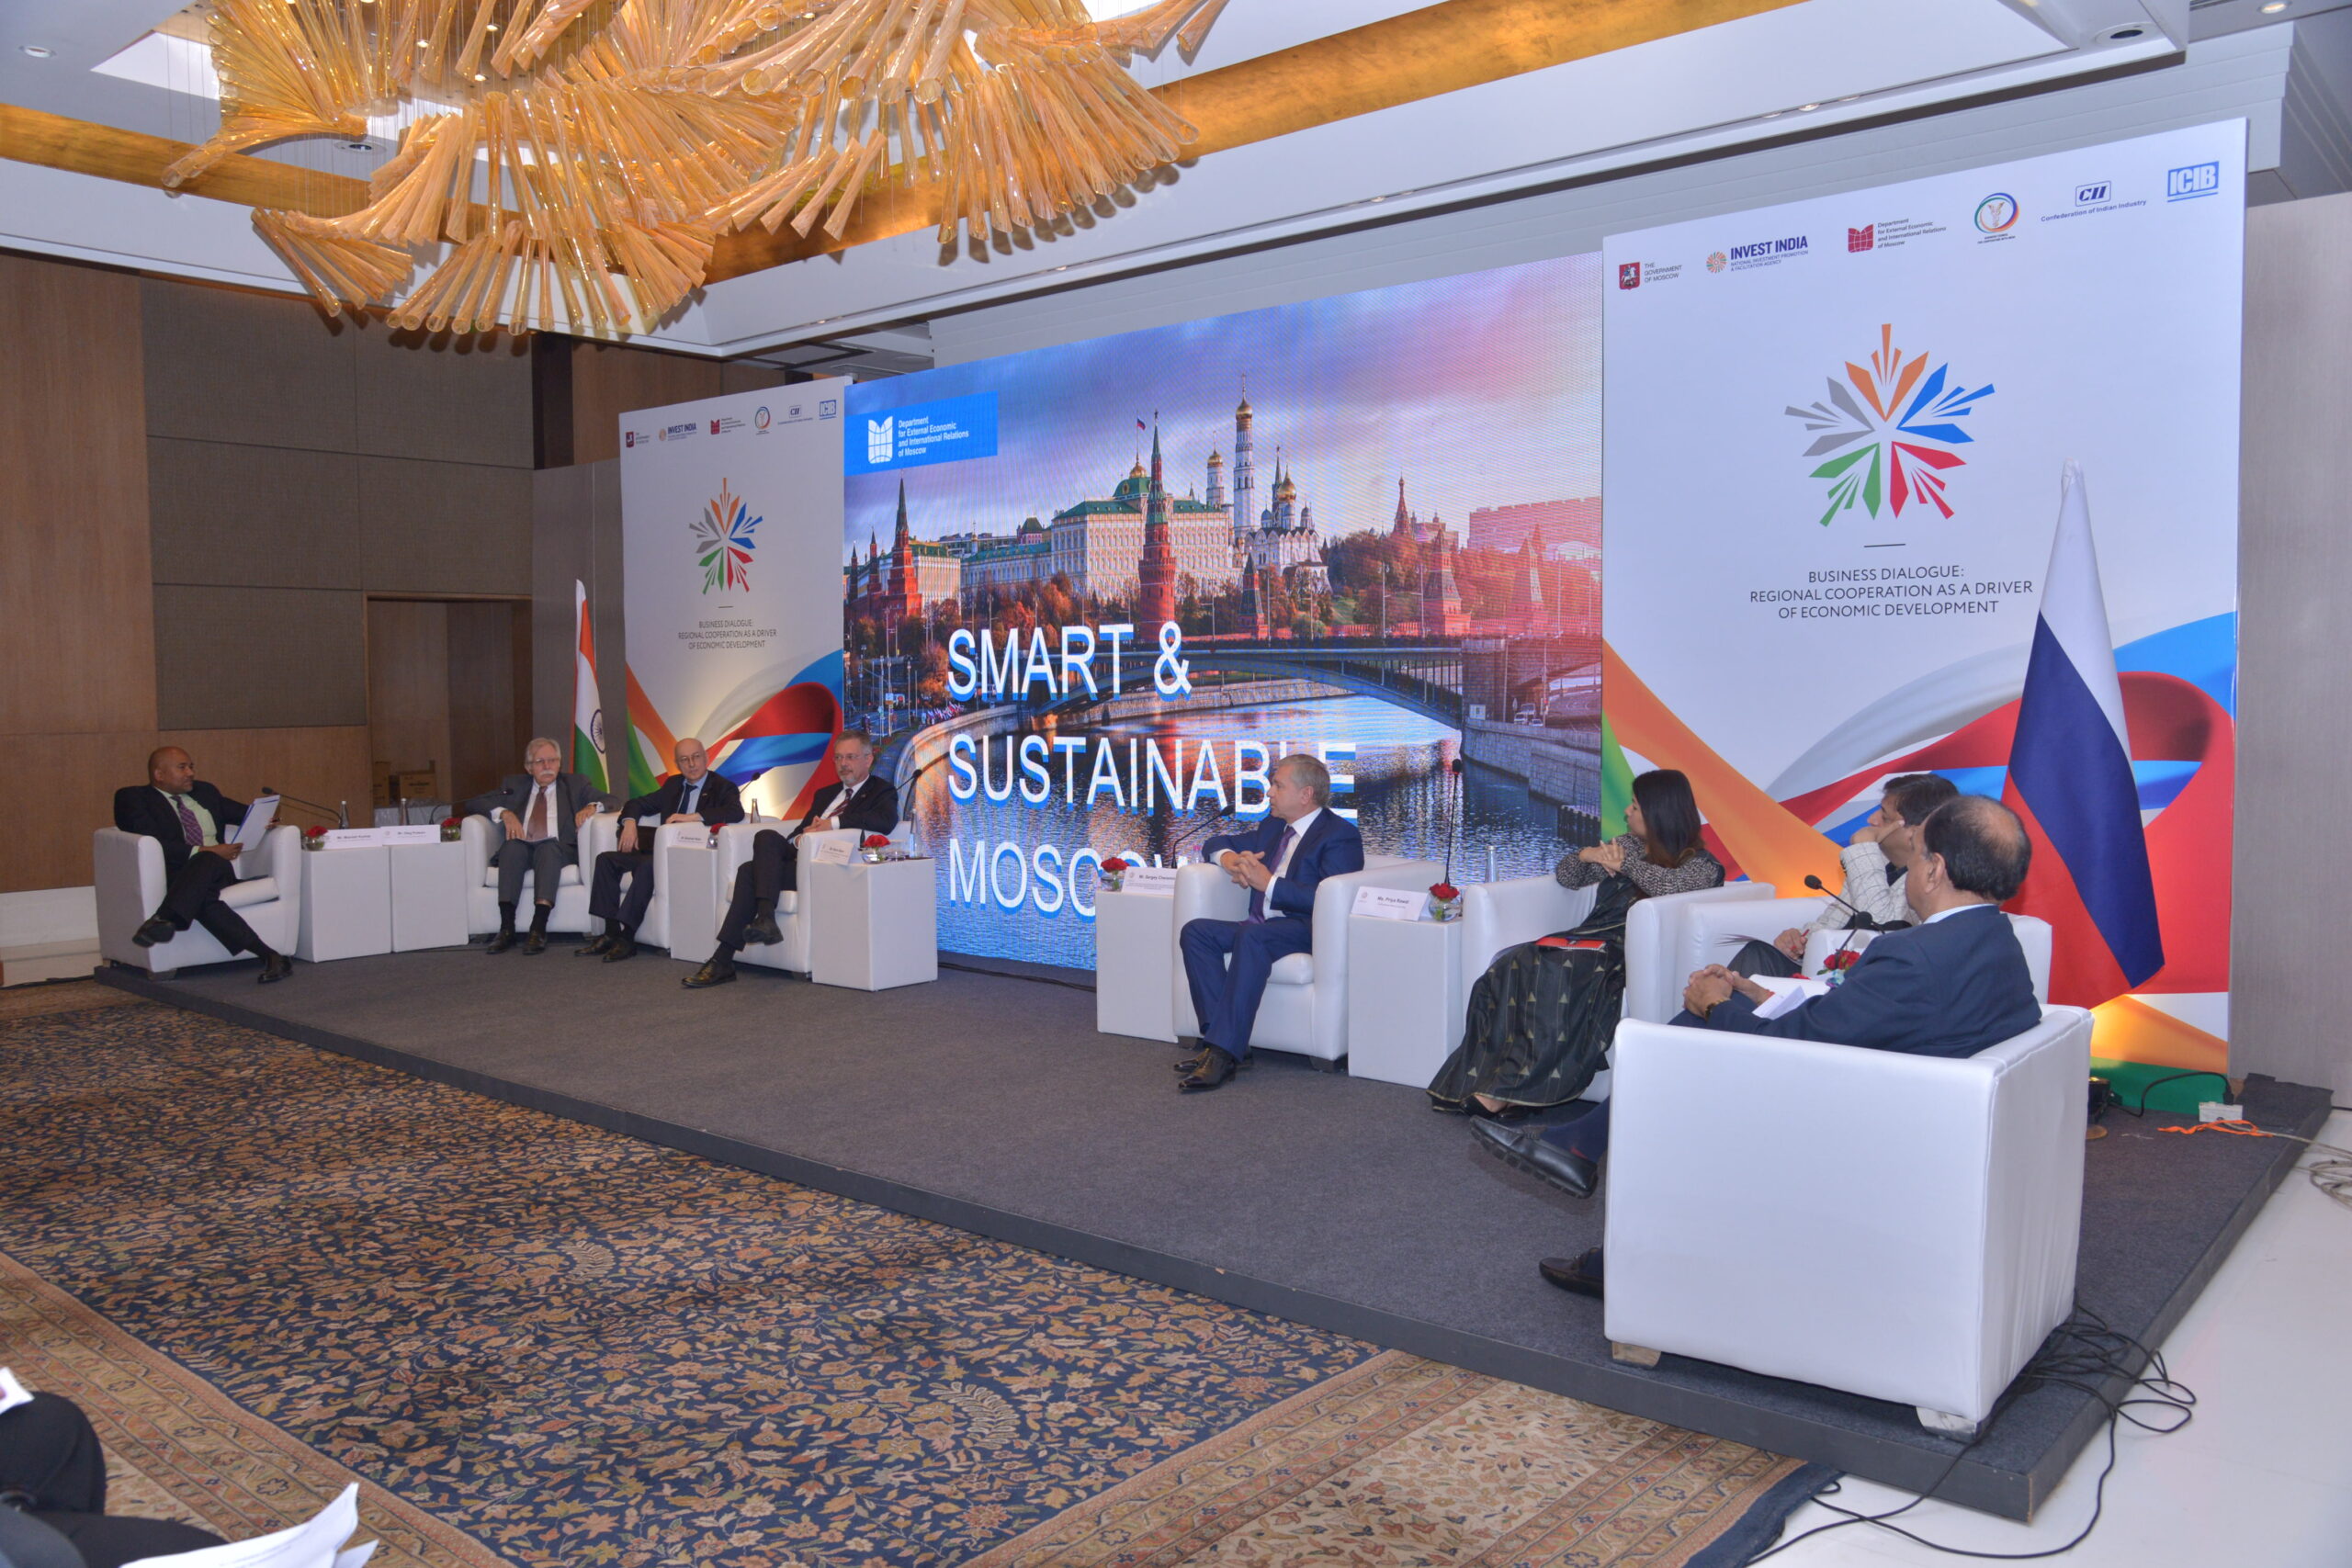 Business dialogue: Regional cooperation as a driver of economic development